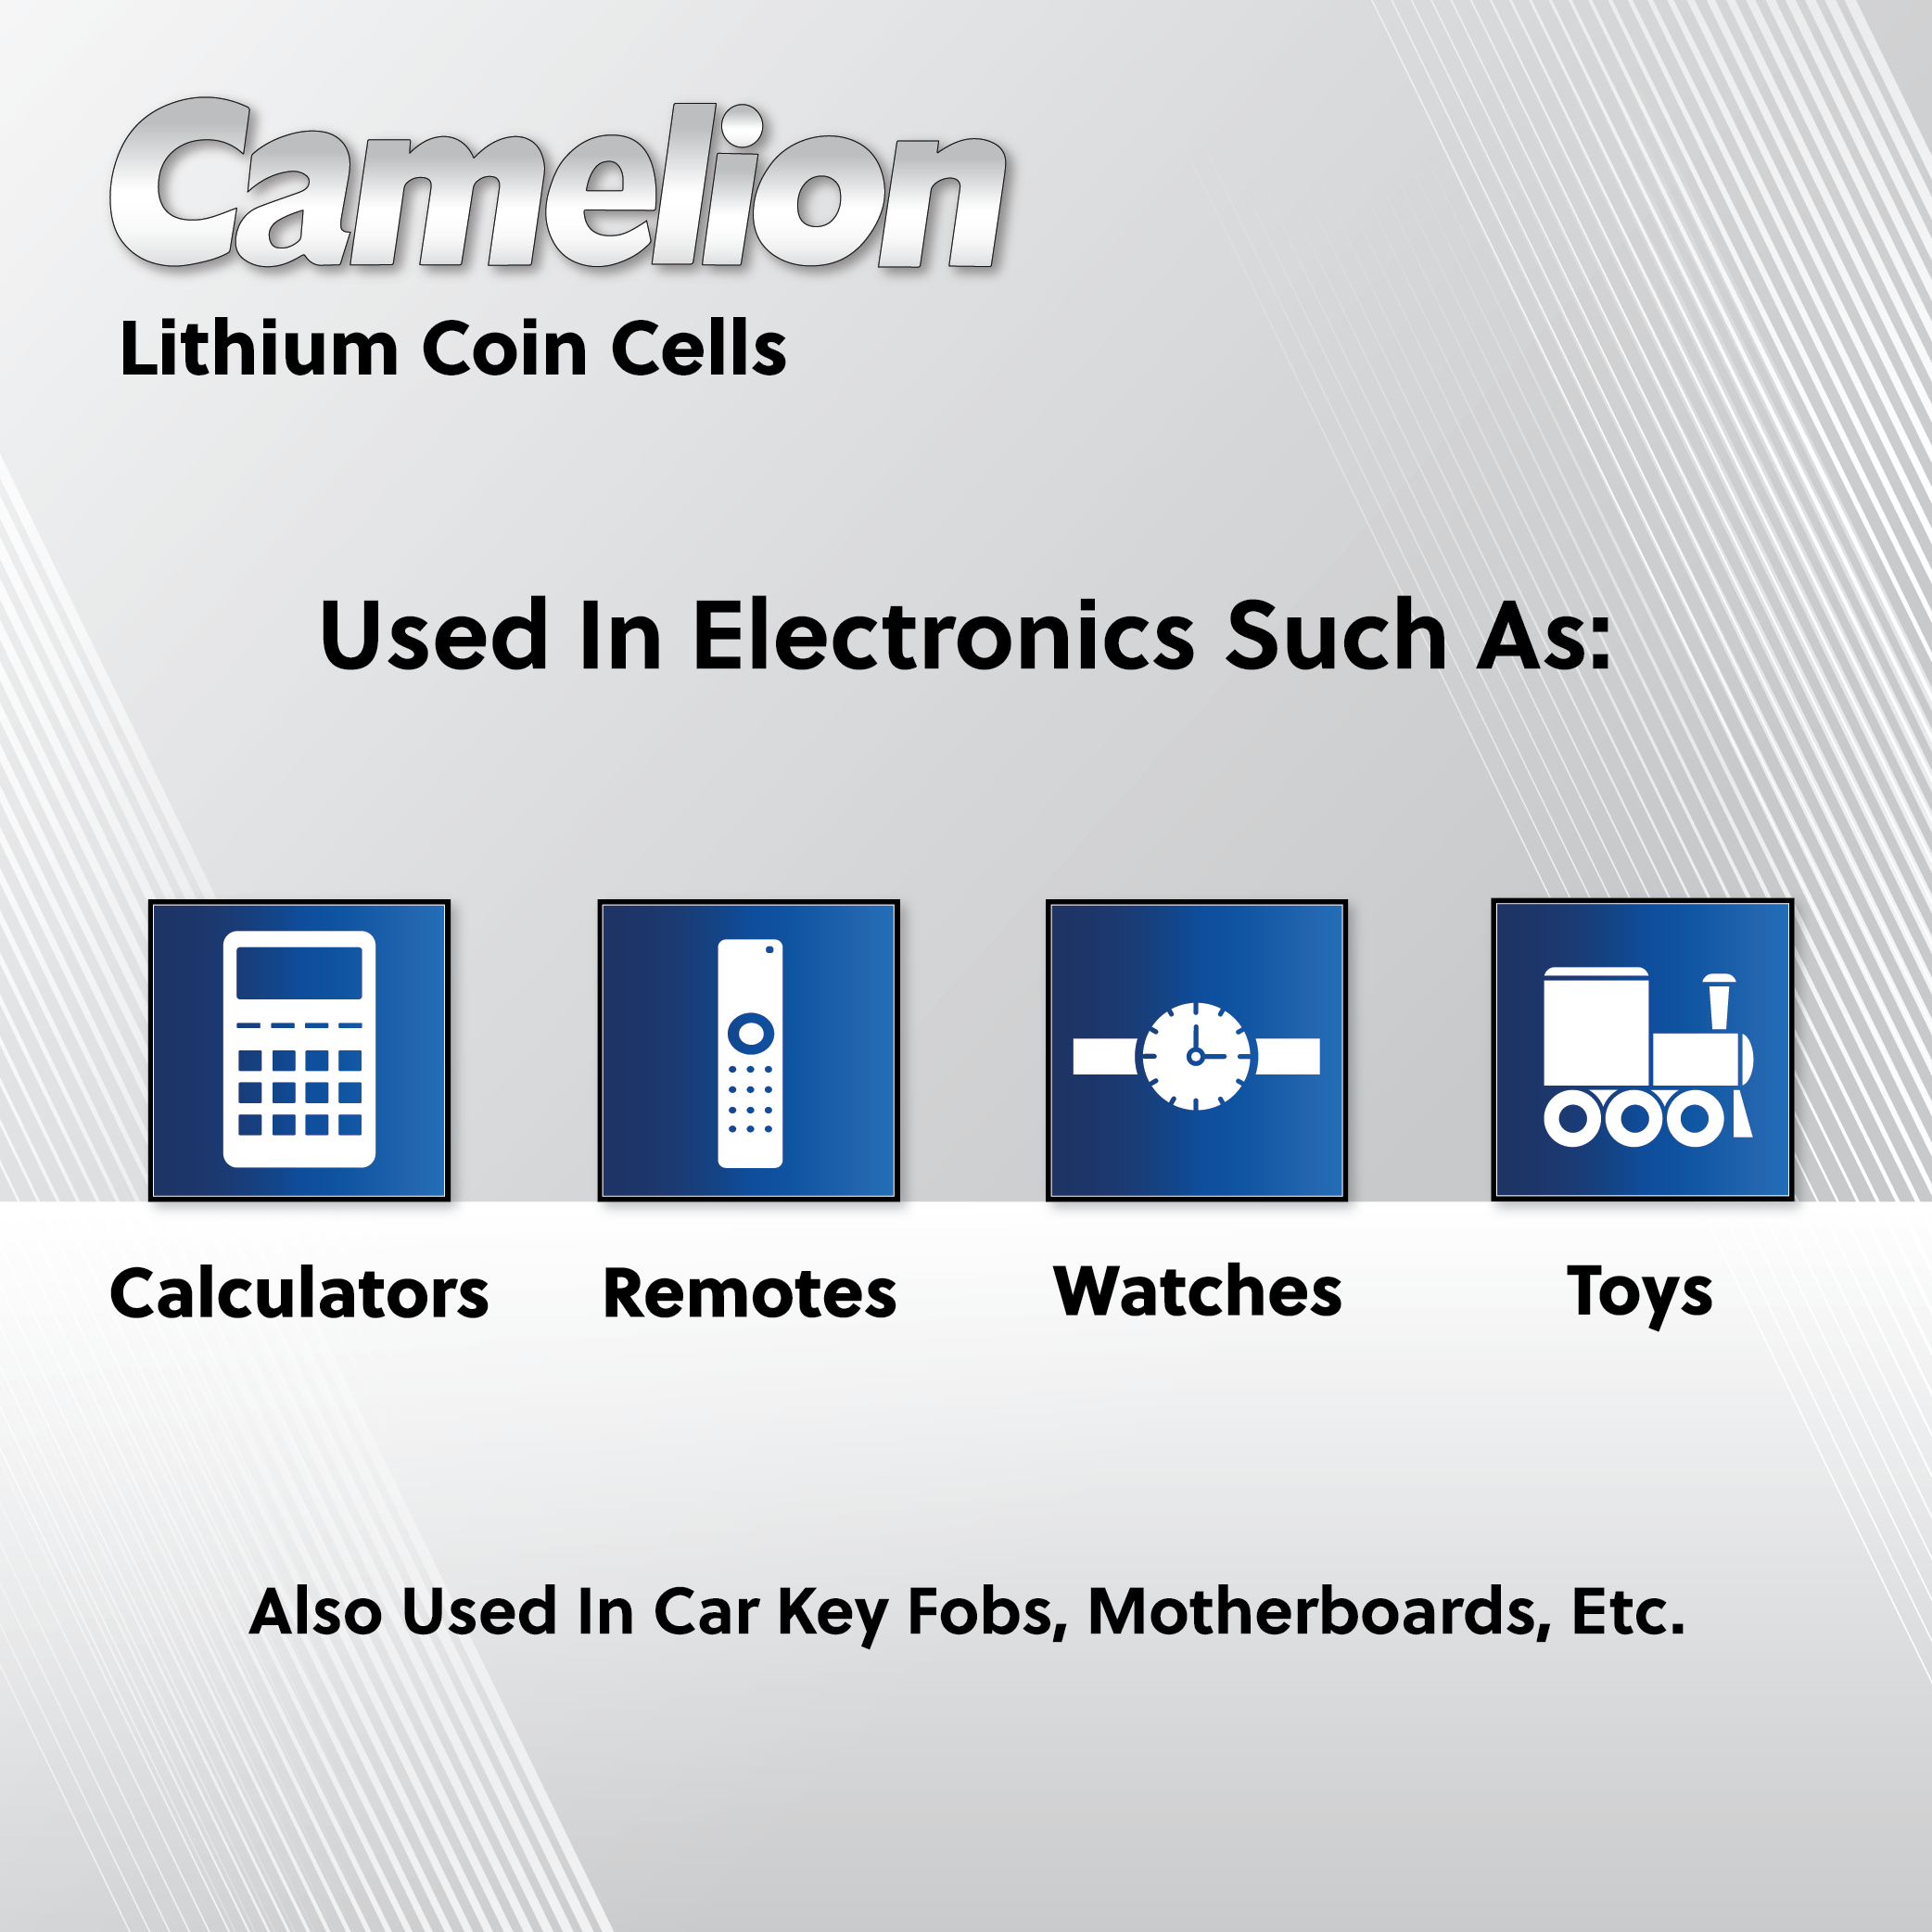 Camelion CR2025 3V Lithium Coin Cell Battery (Three Packaging Options)